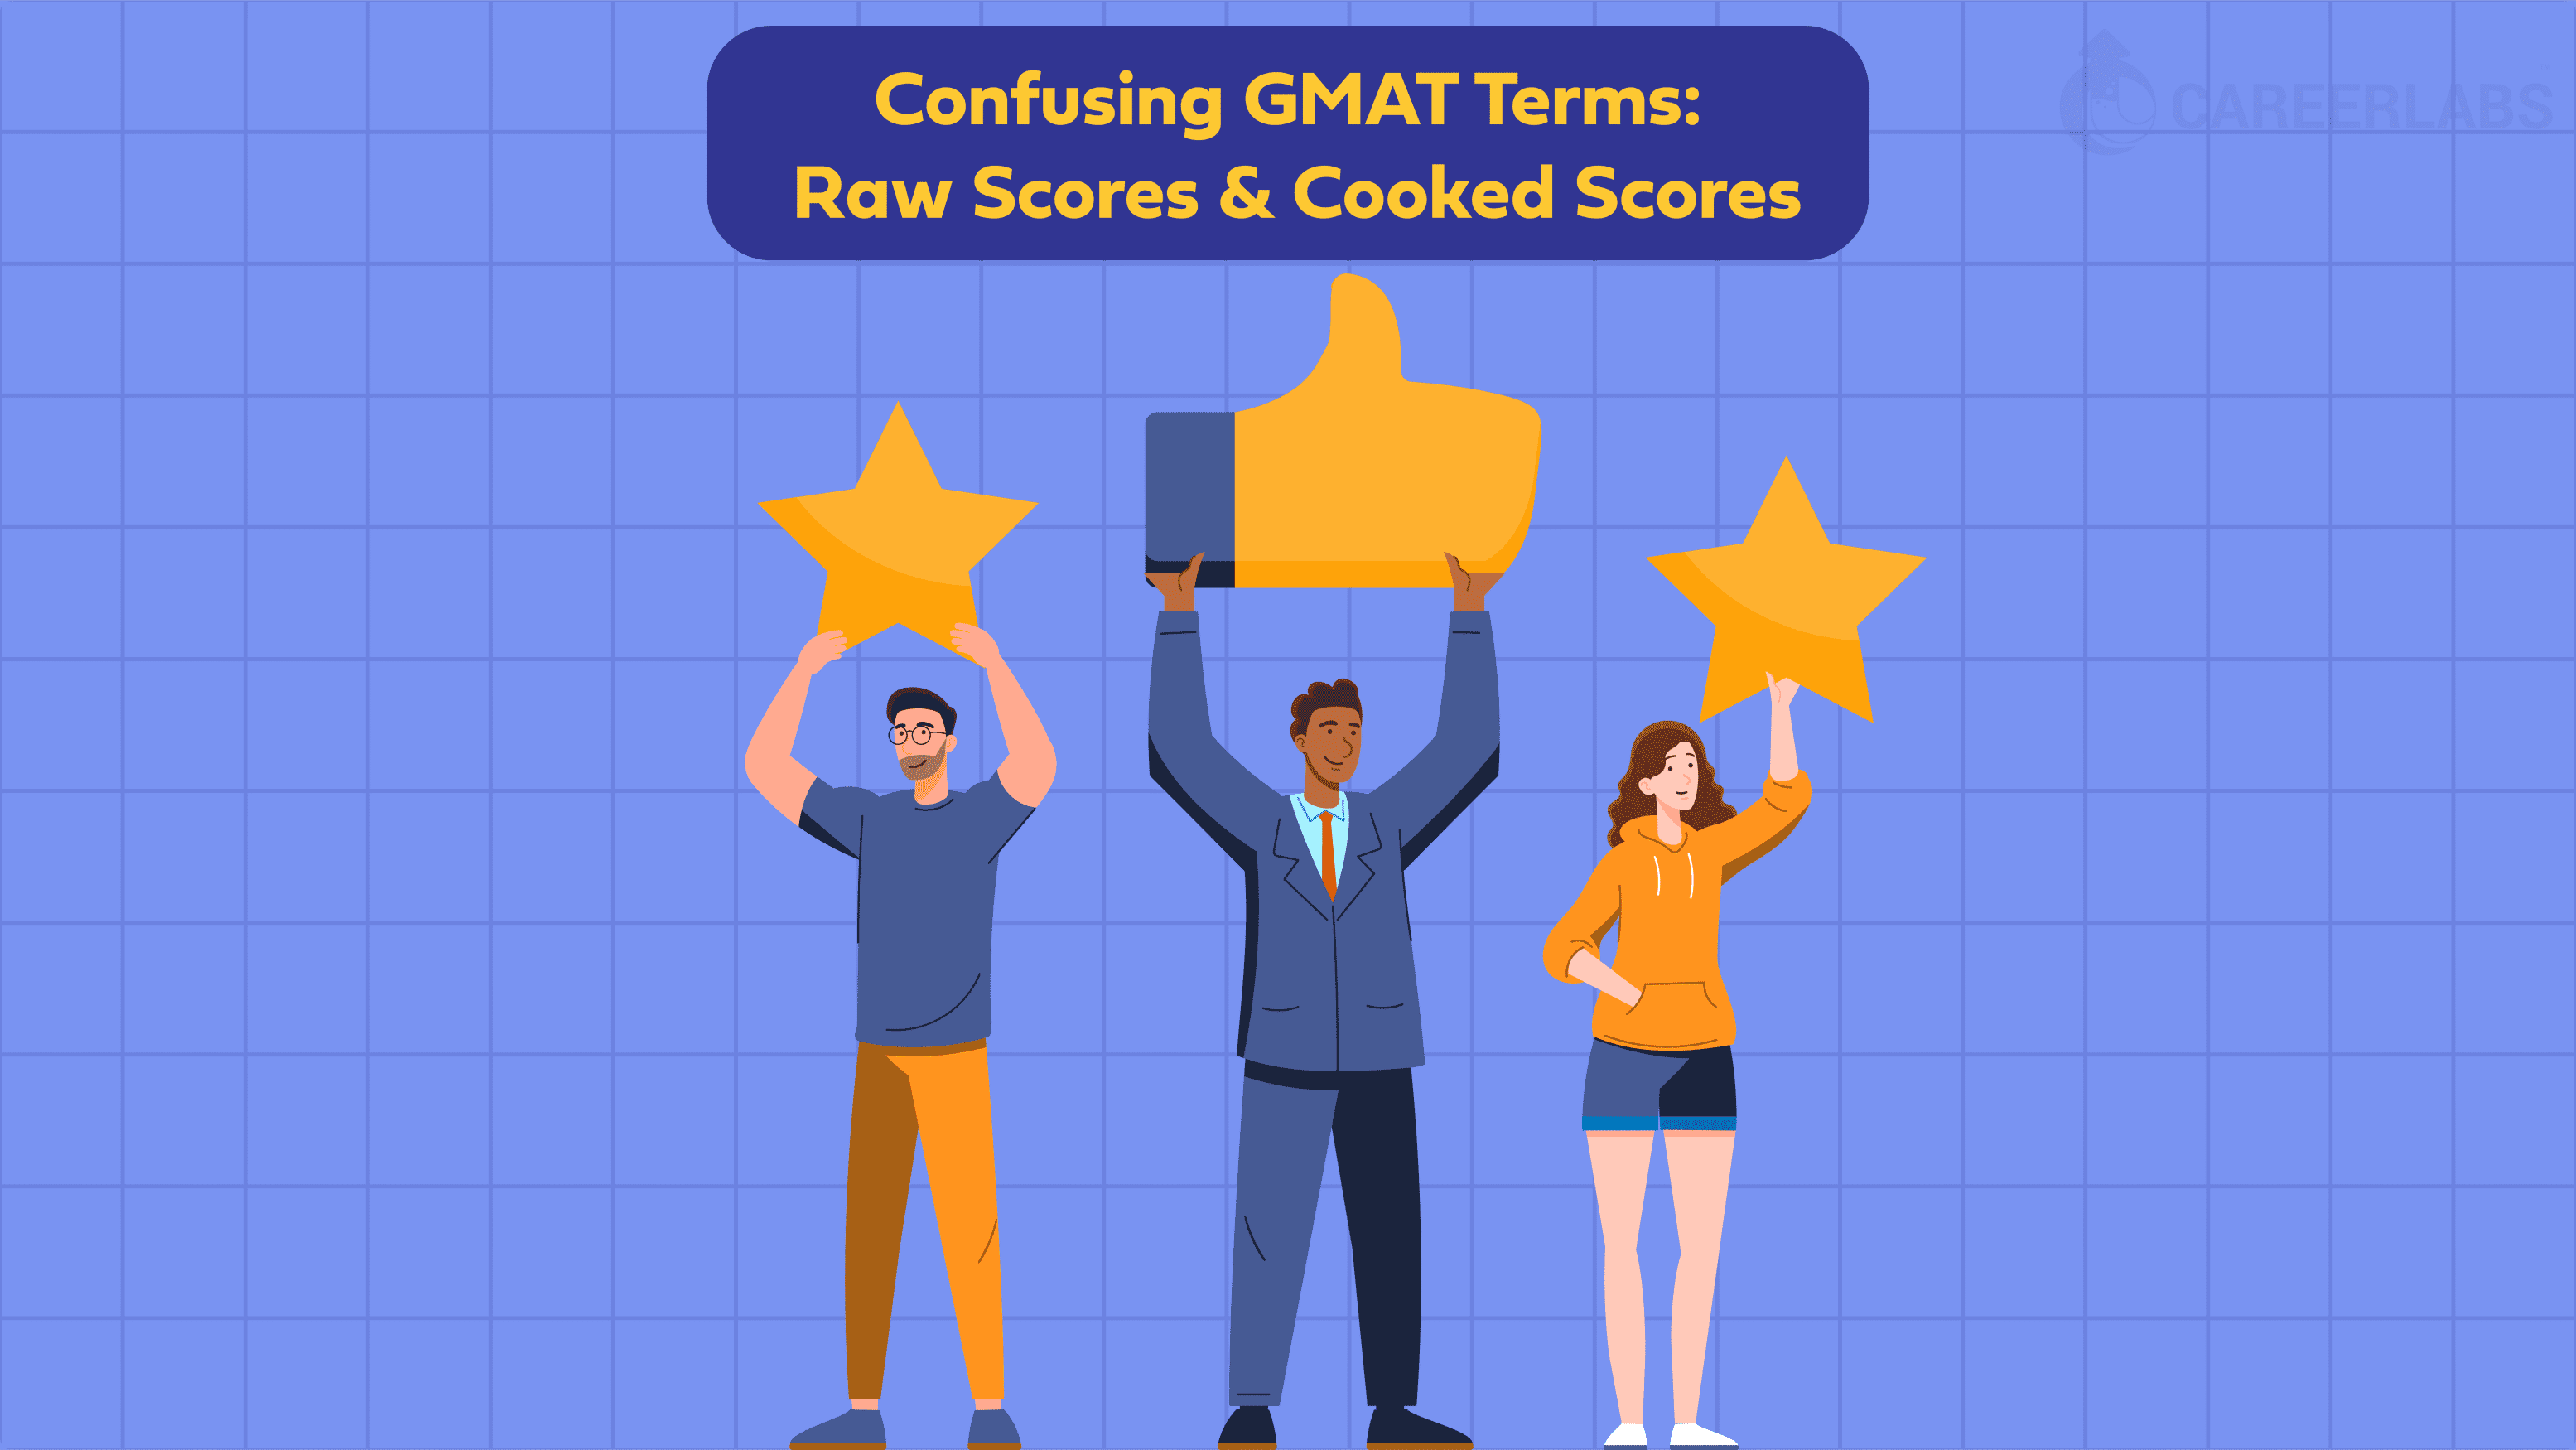 Raw Scores, Cooked-up Scores & Other Confusing GMAT Terms